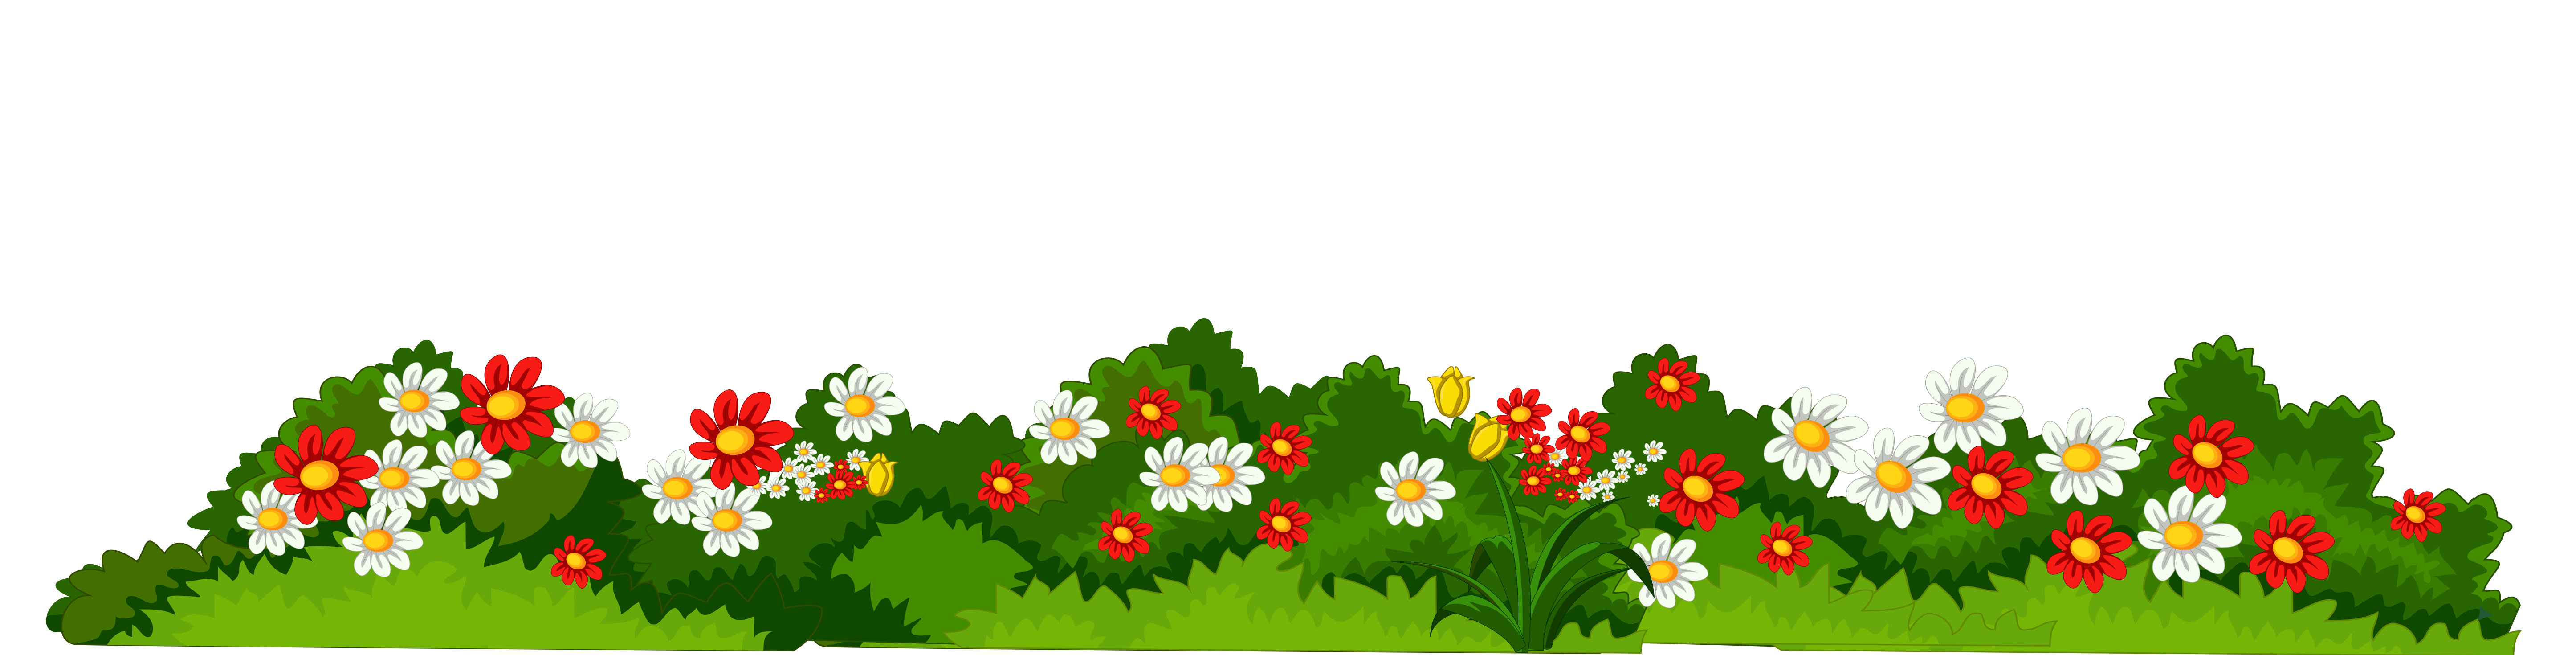 grass with flower clipart - Clip Art Library